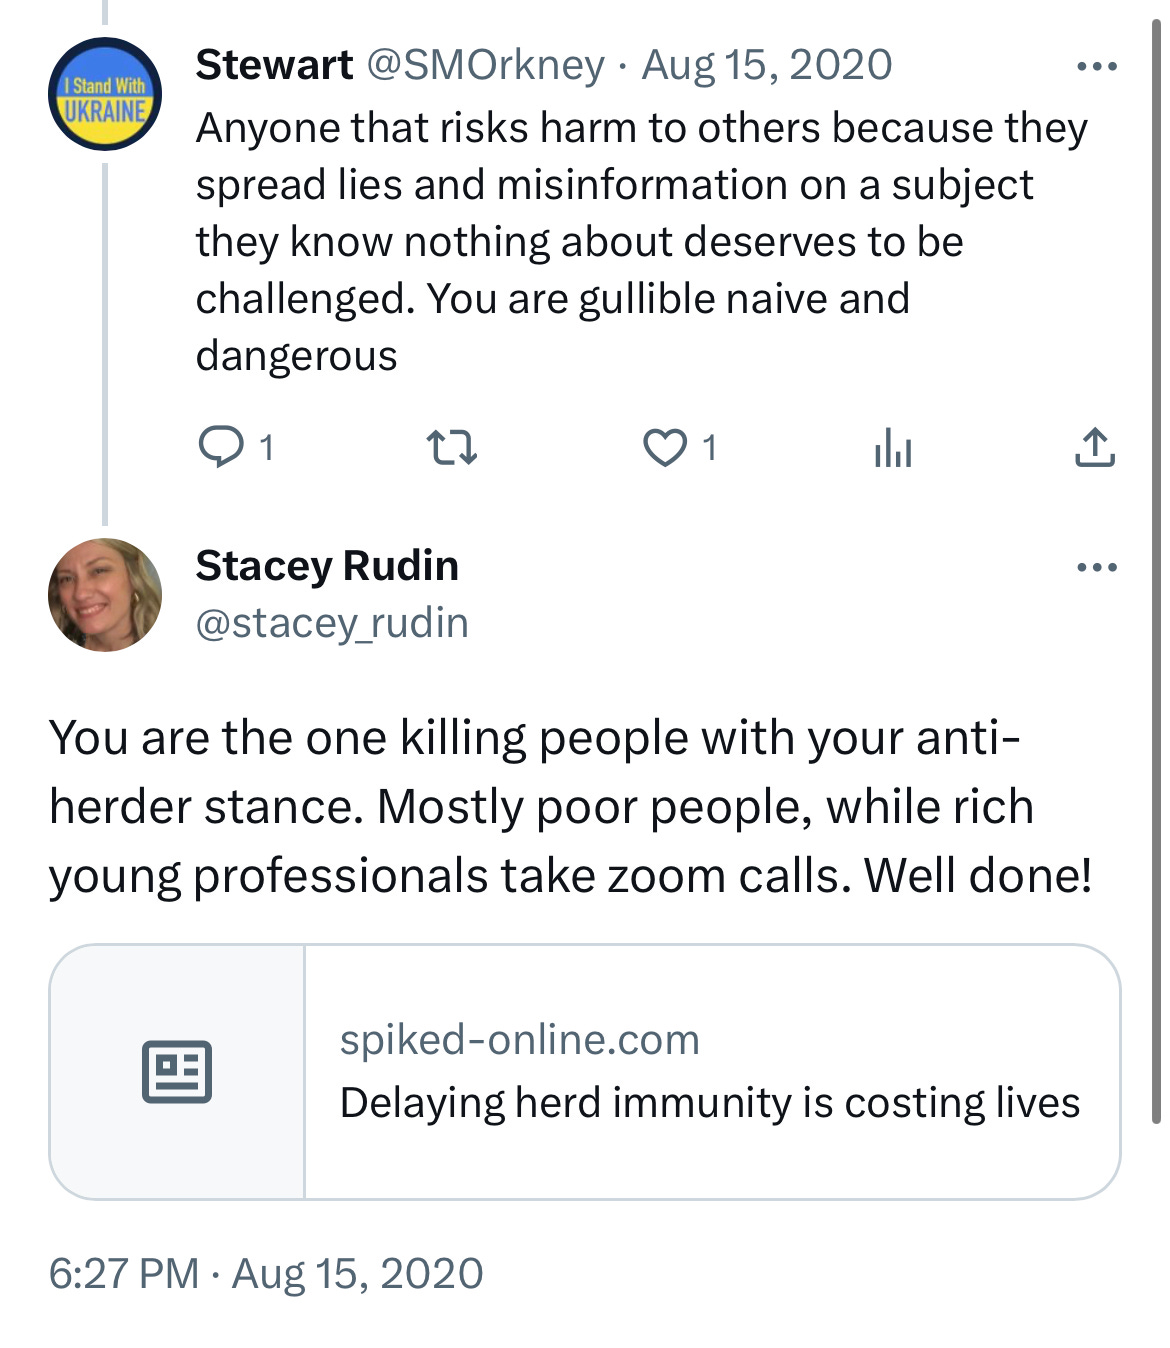 Stacey Rudin of Brownstone Institute tweets "You are the one killing people with your anti-herder stance. Mostly poor people, while rich young professionals take zoom calls. Well done!"